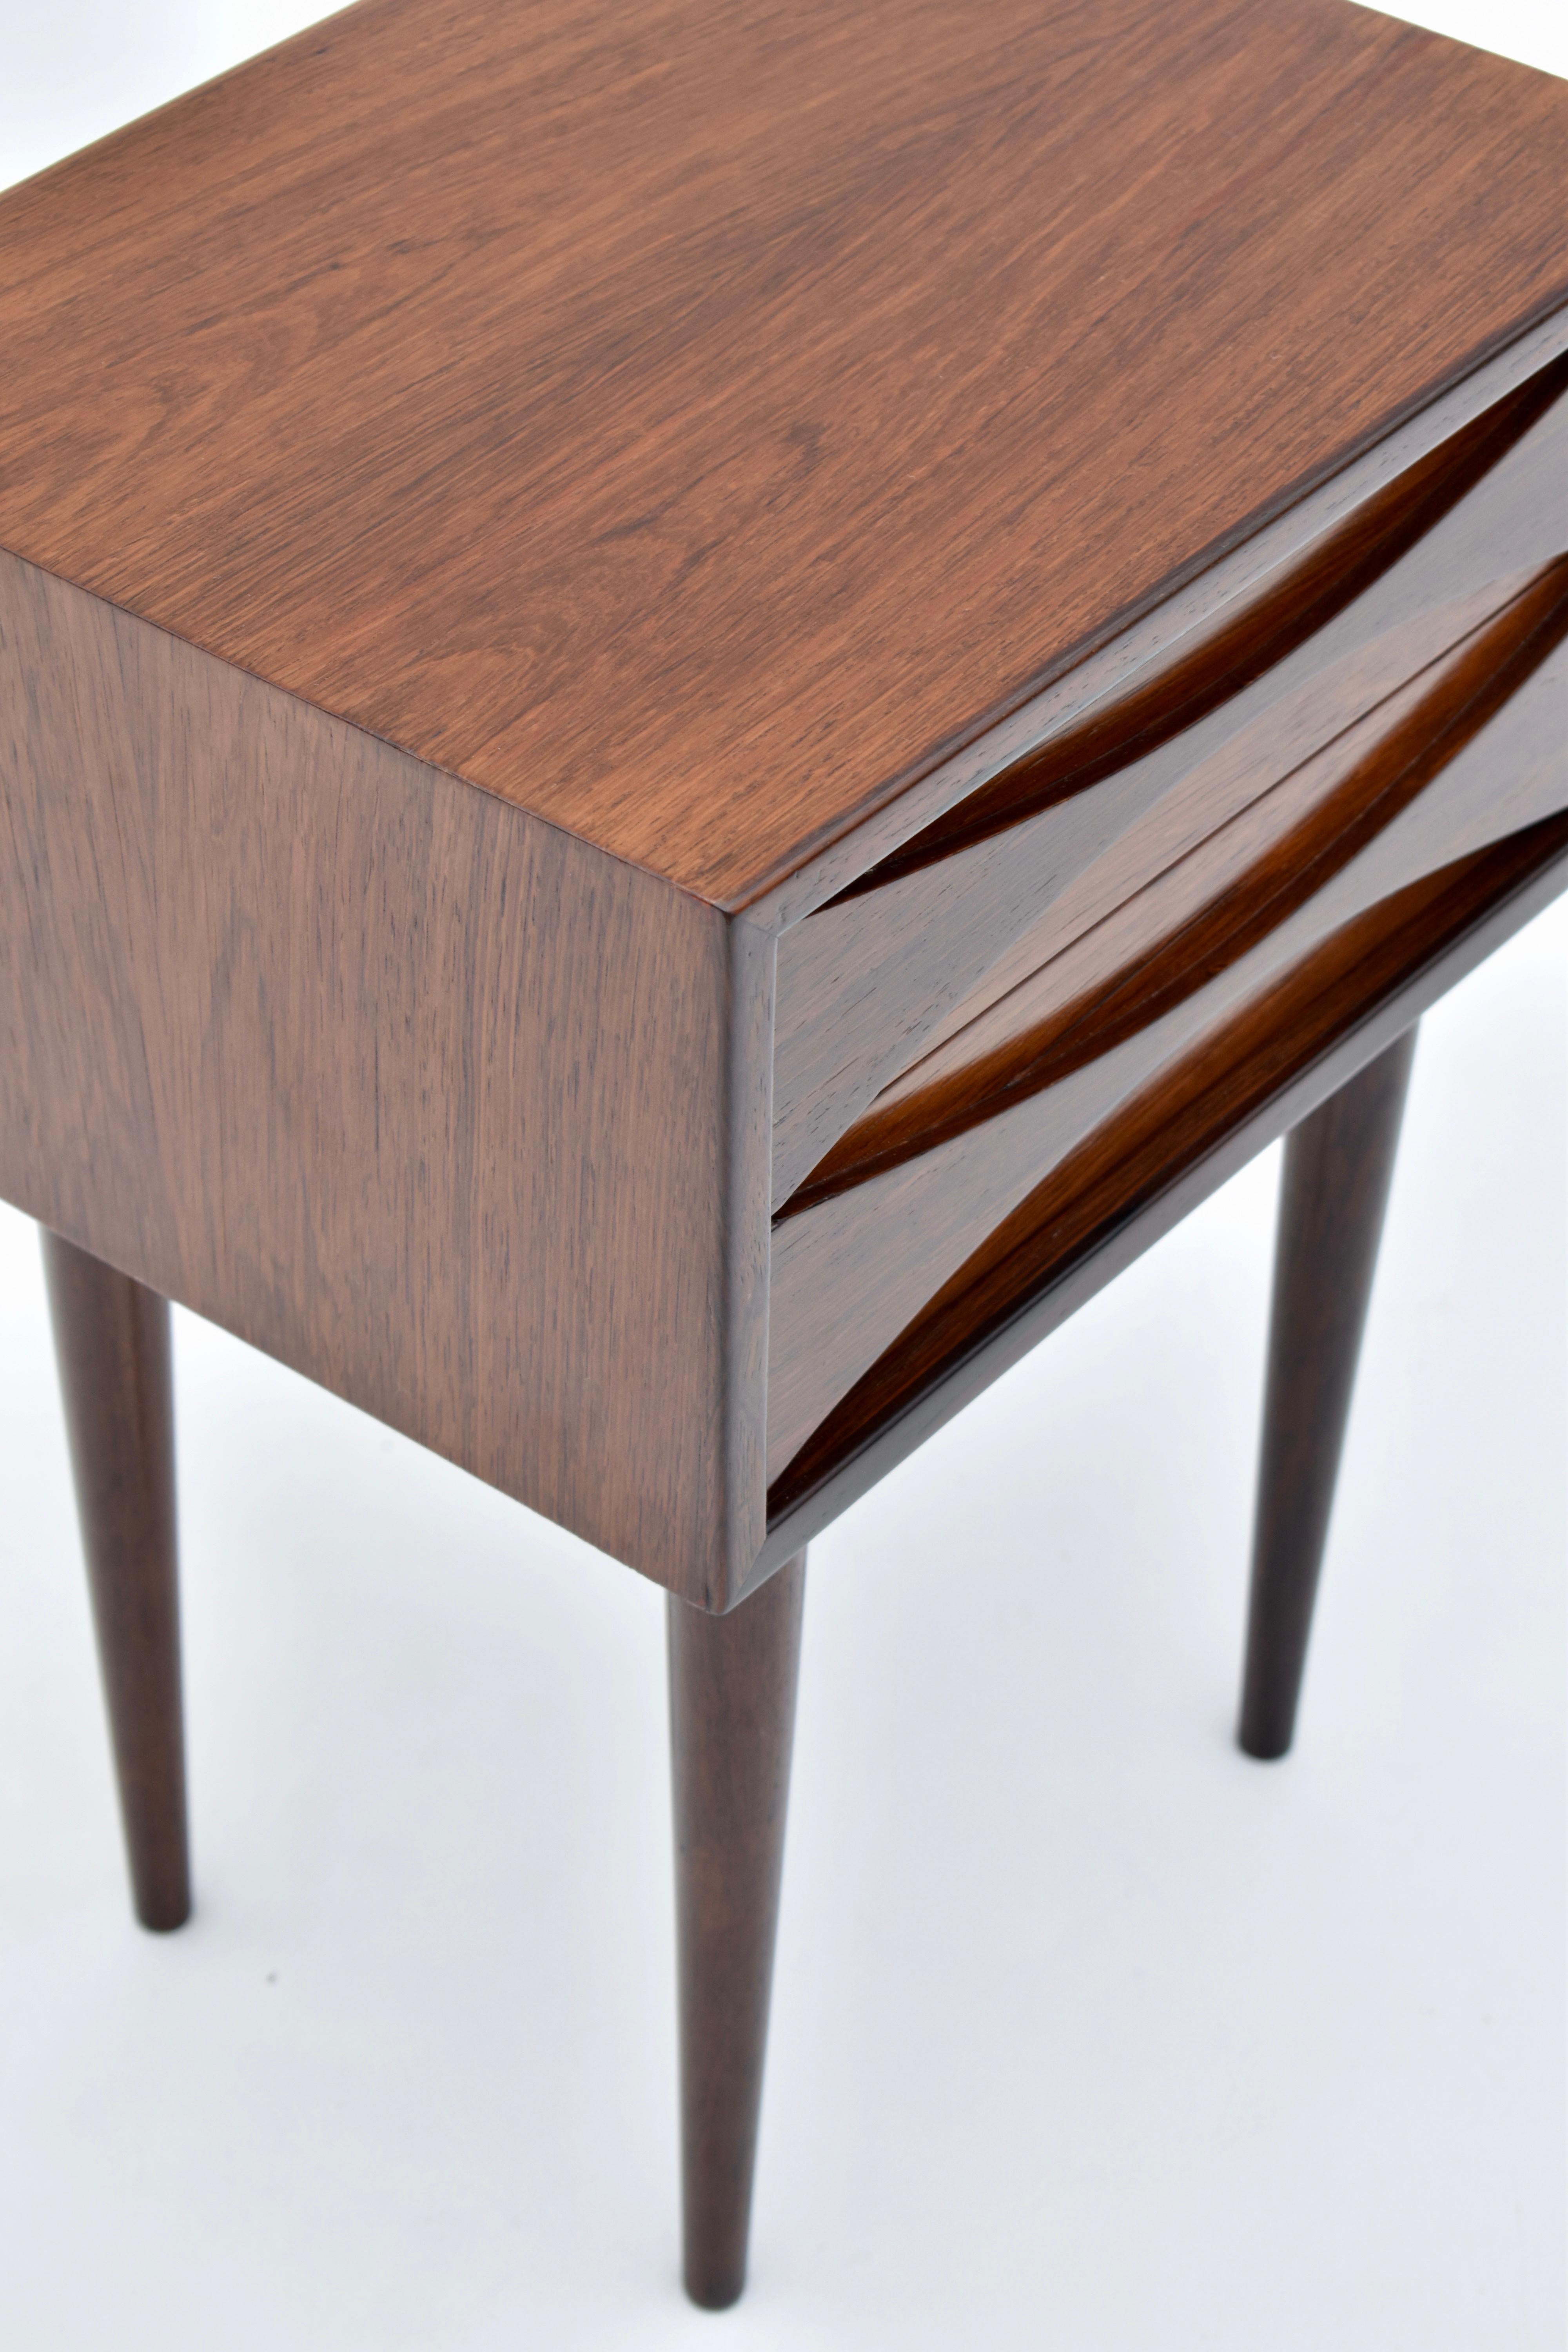 Niels Clausen Rosewood Chest of Drawers for N.C Mobler 3